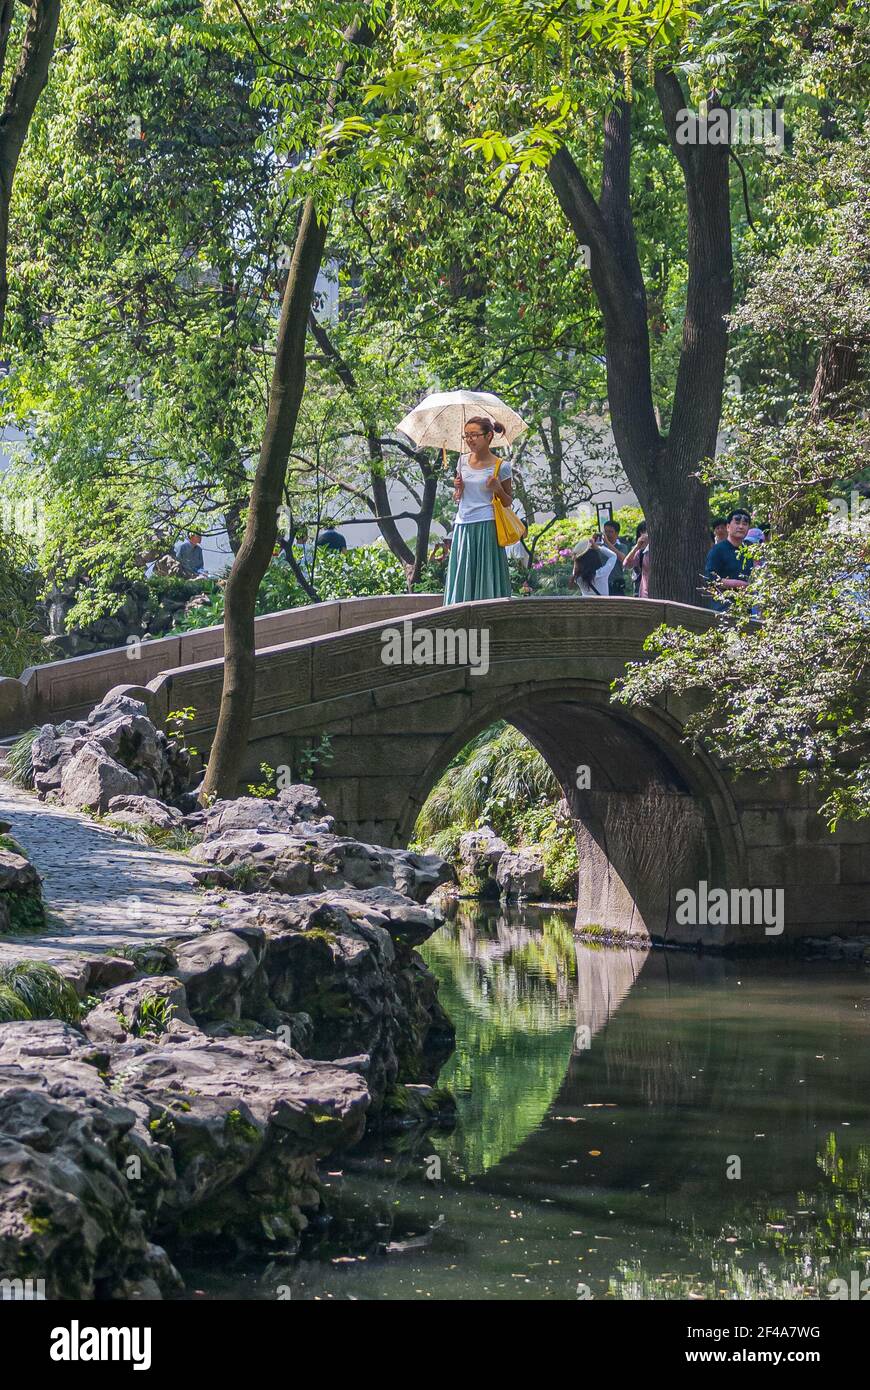 Suzhou, China - May 3, 2010: Humble Administrators Garden.  young woman with white umbrella stans on gray stone bridge over creek with rocky shore und Stock Photo